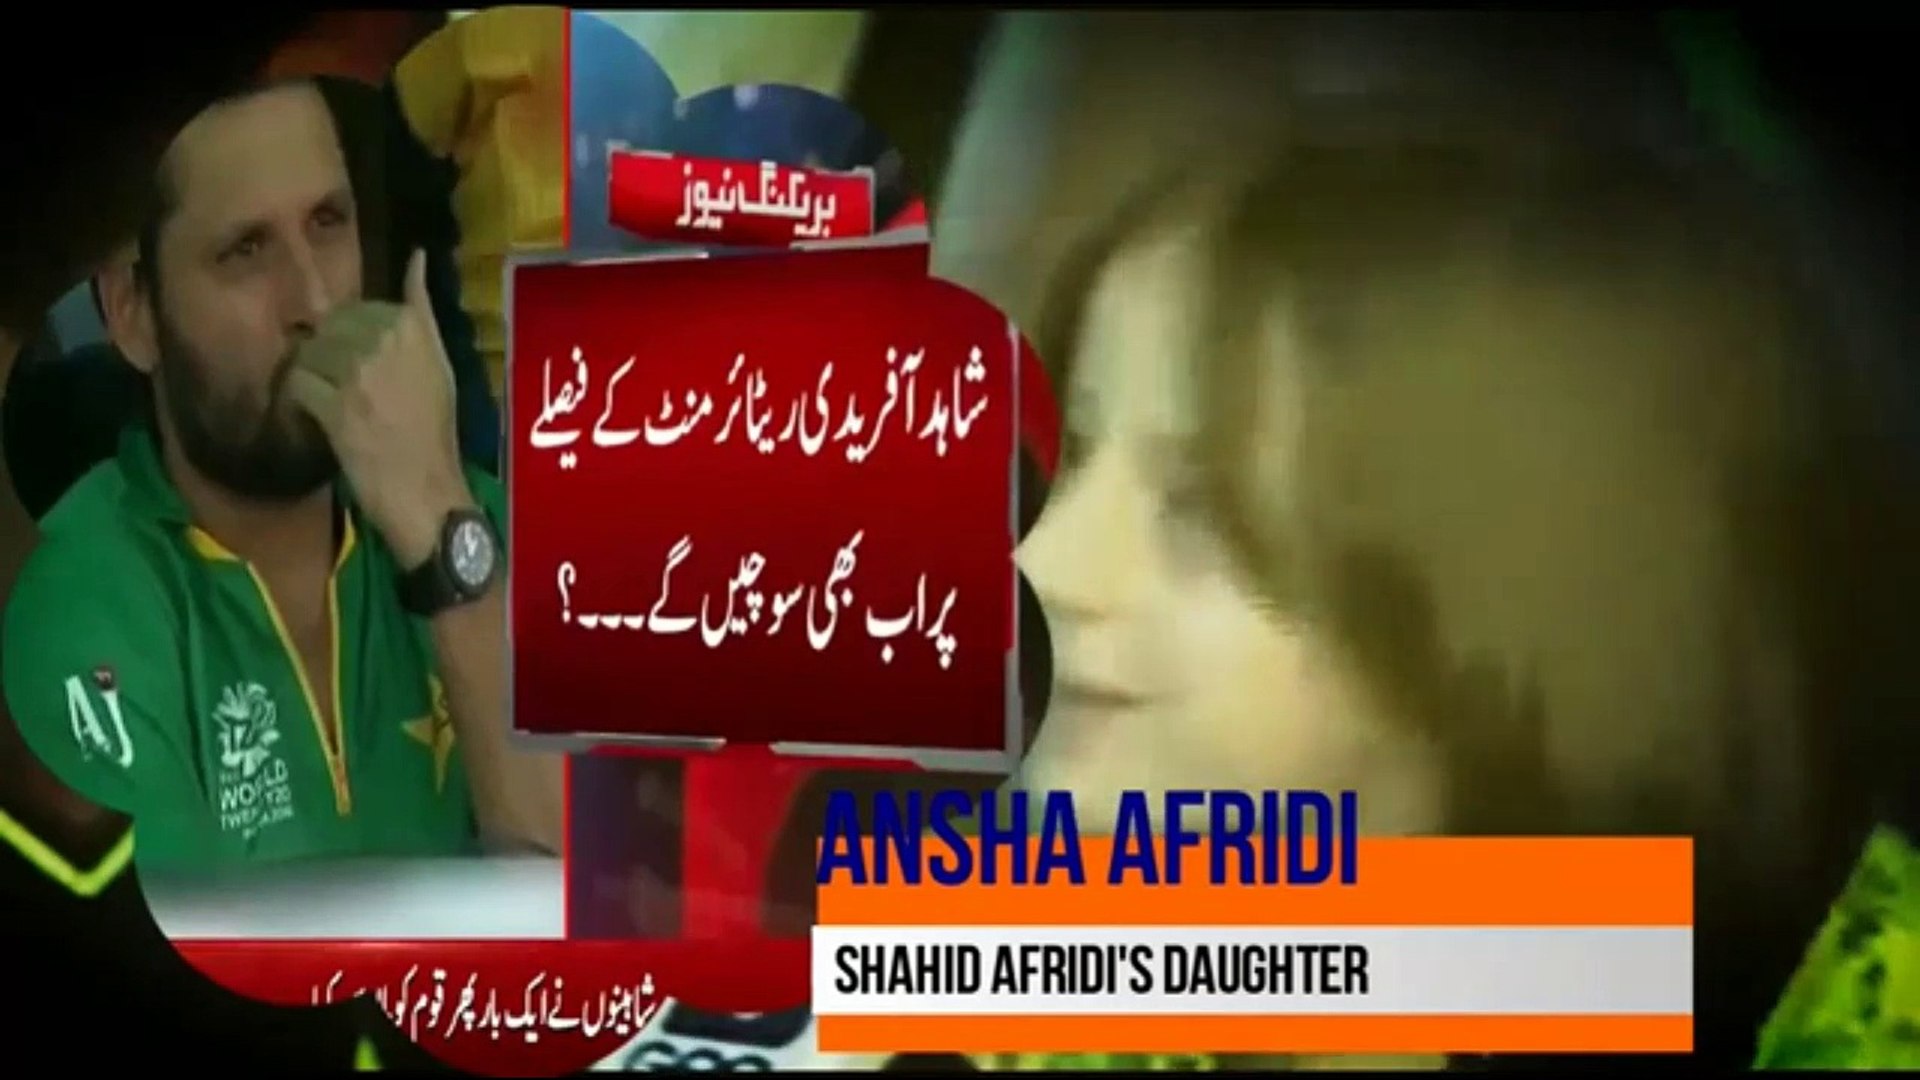 shahid afridi 's daughter responce lose pak ind match